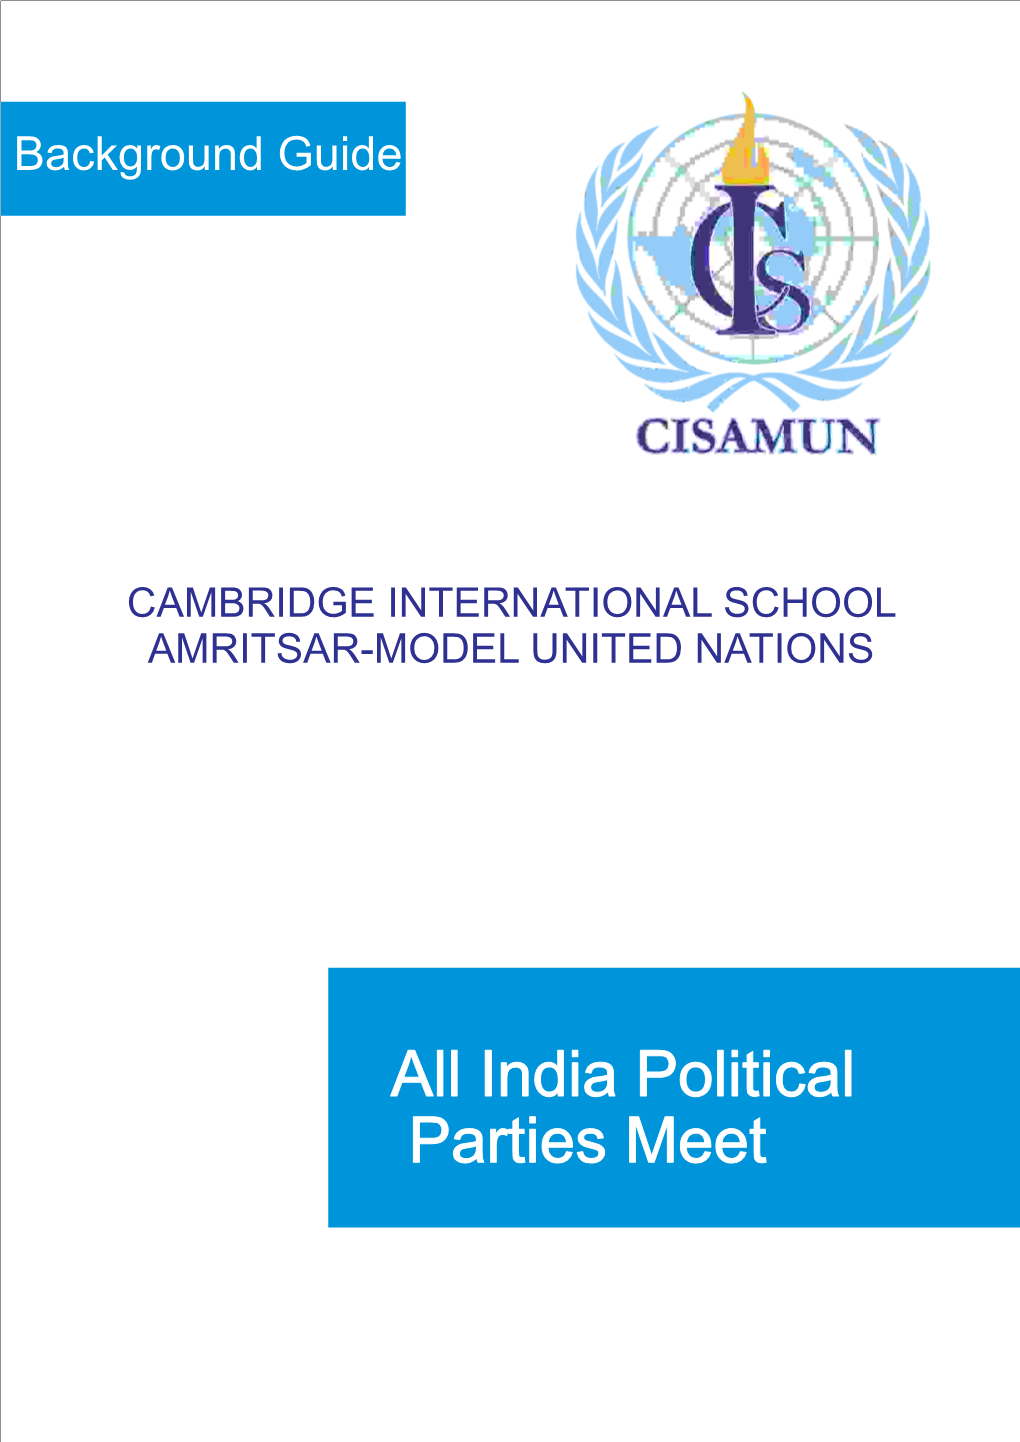 All India Political Parties Meet ABOUT CISAMUN We, at CISA, Proudly Present the Launch of the CISAMUN, a Venture Into the World of Model United Nation